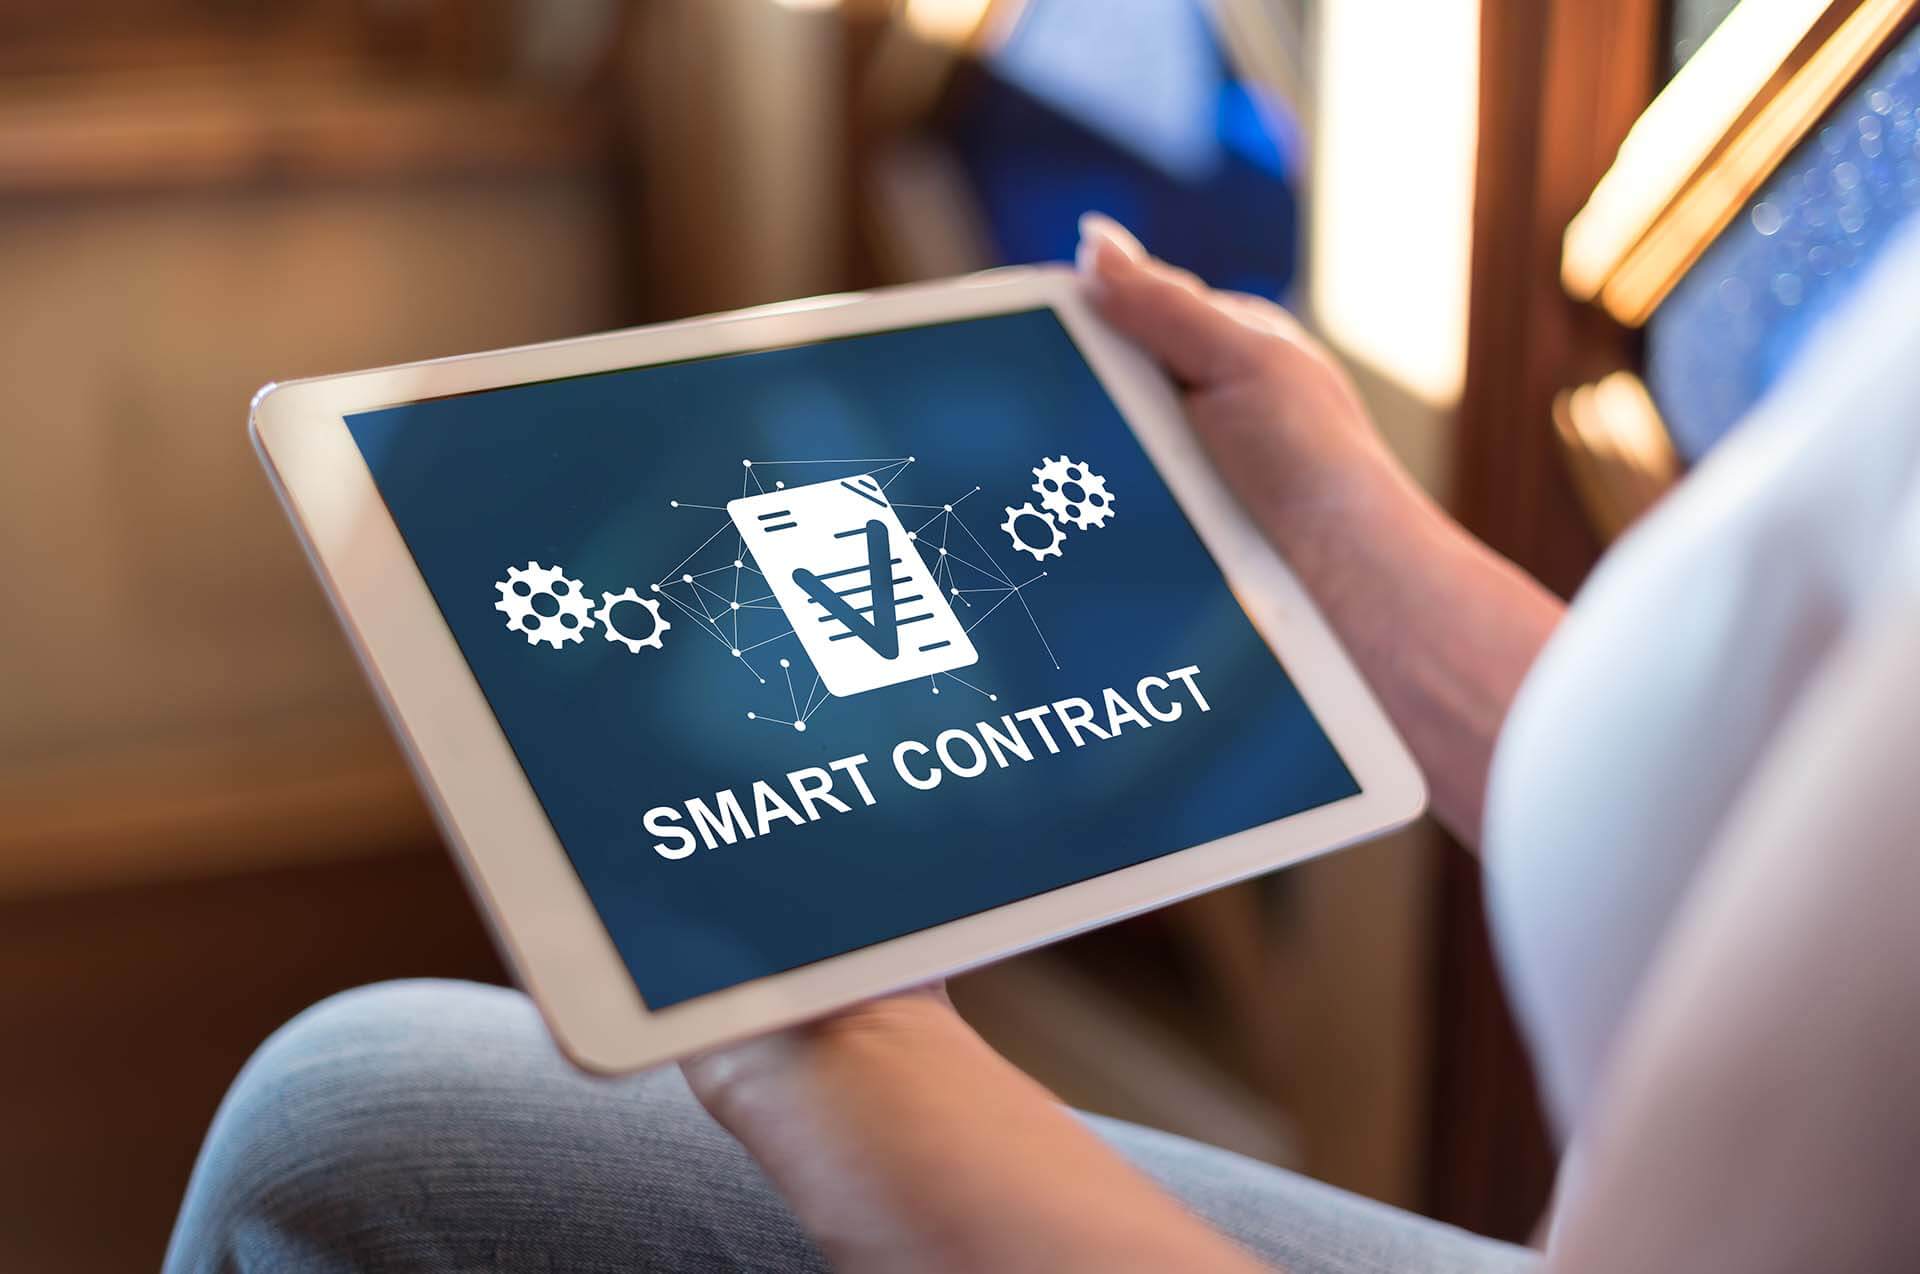 Grow your career with Smart Contracts